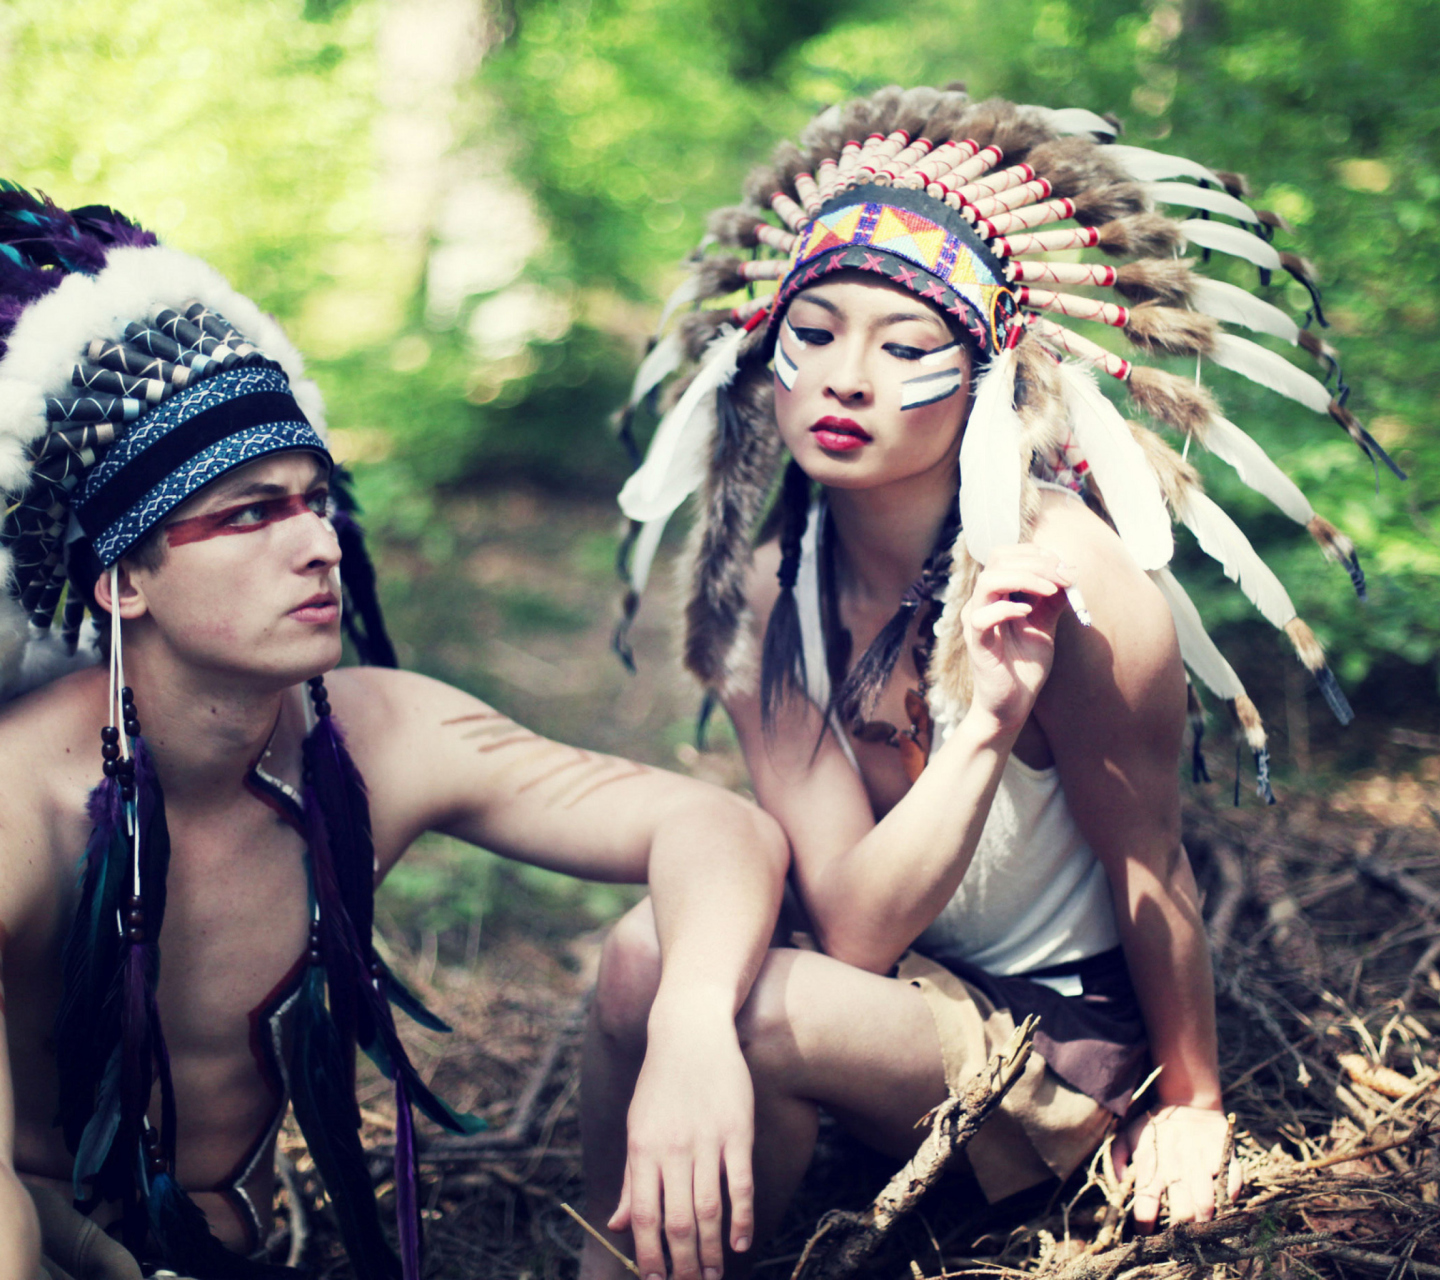 Indian Feather Hat wallpaper 1440x1280